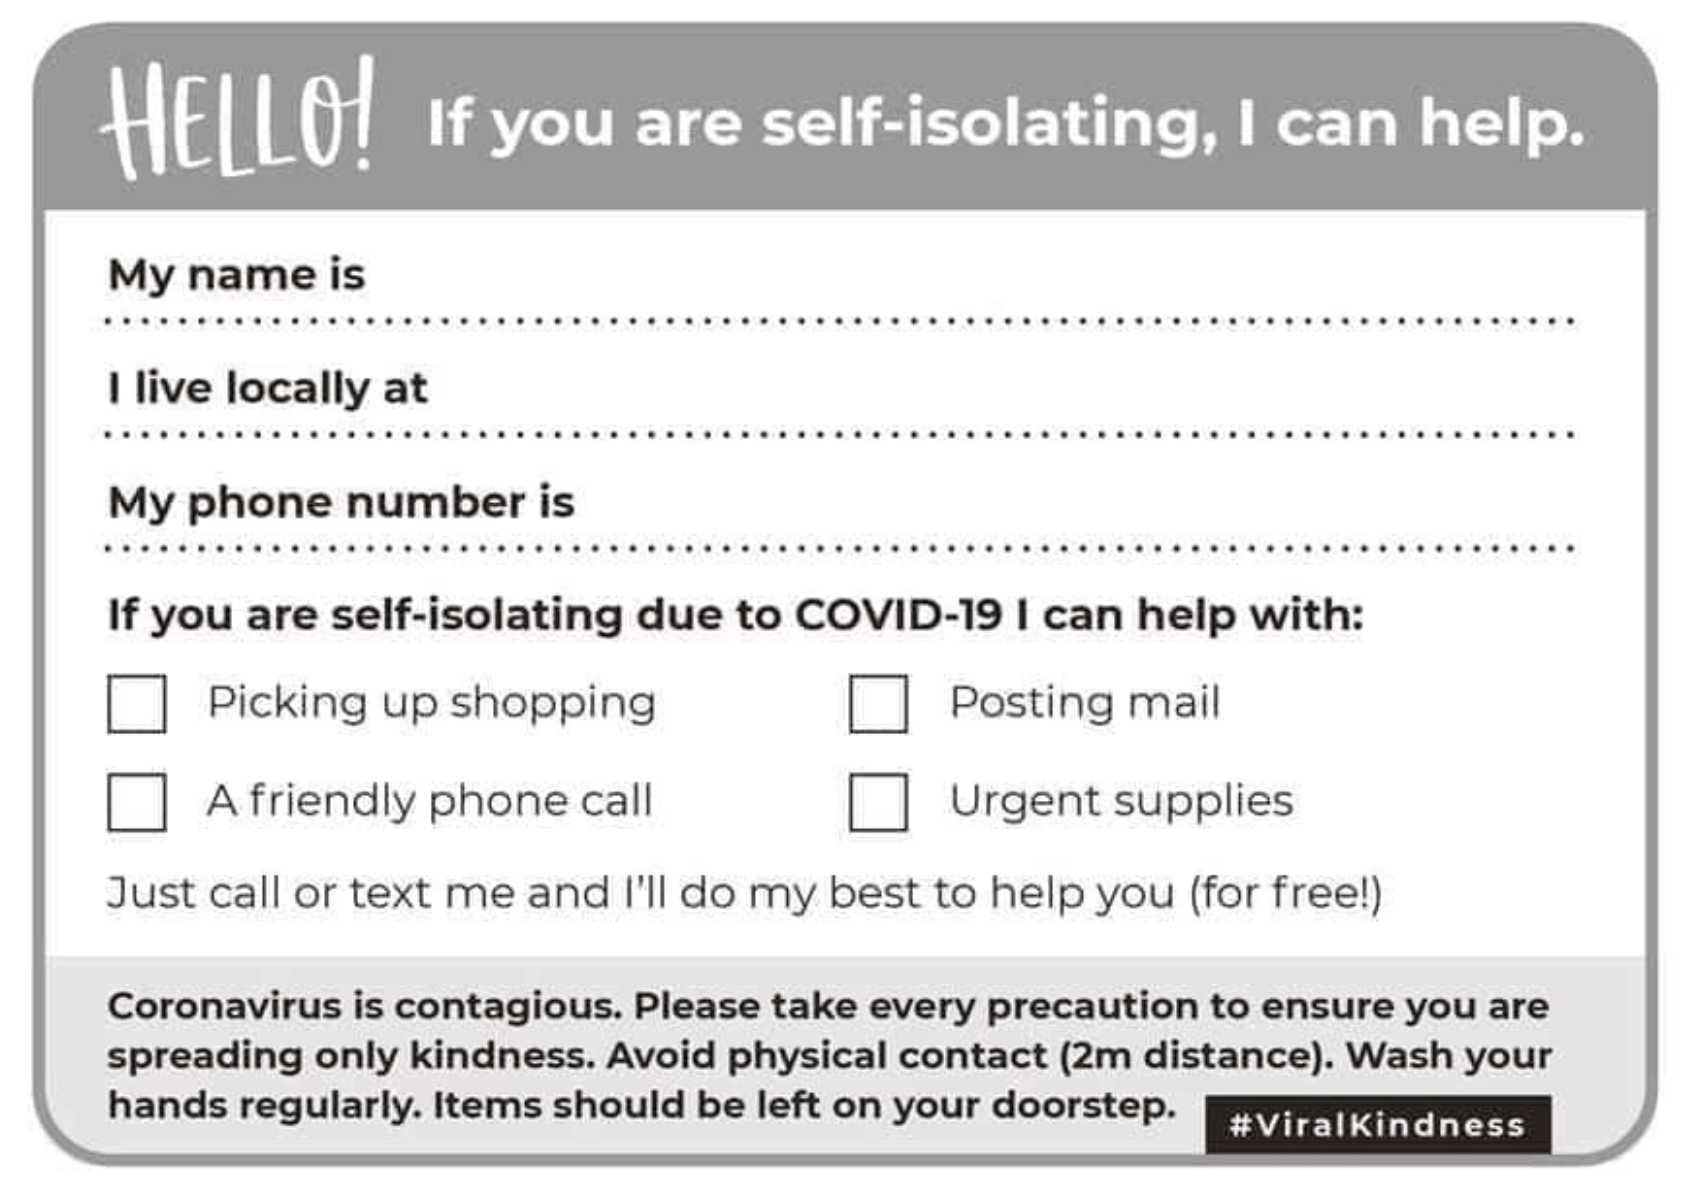 Hello! If you are self-isolating, I can Help.